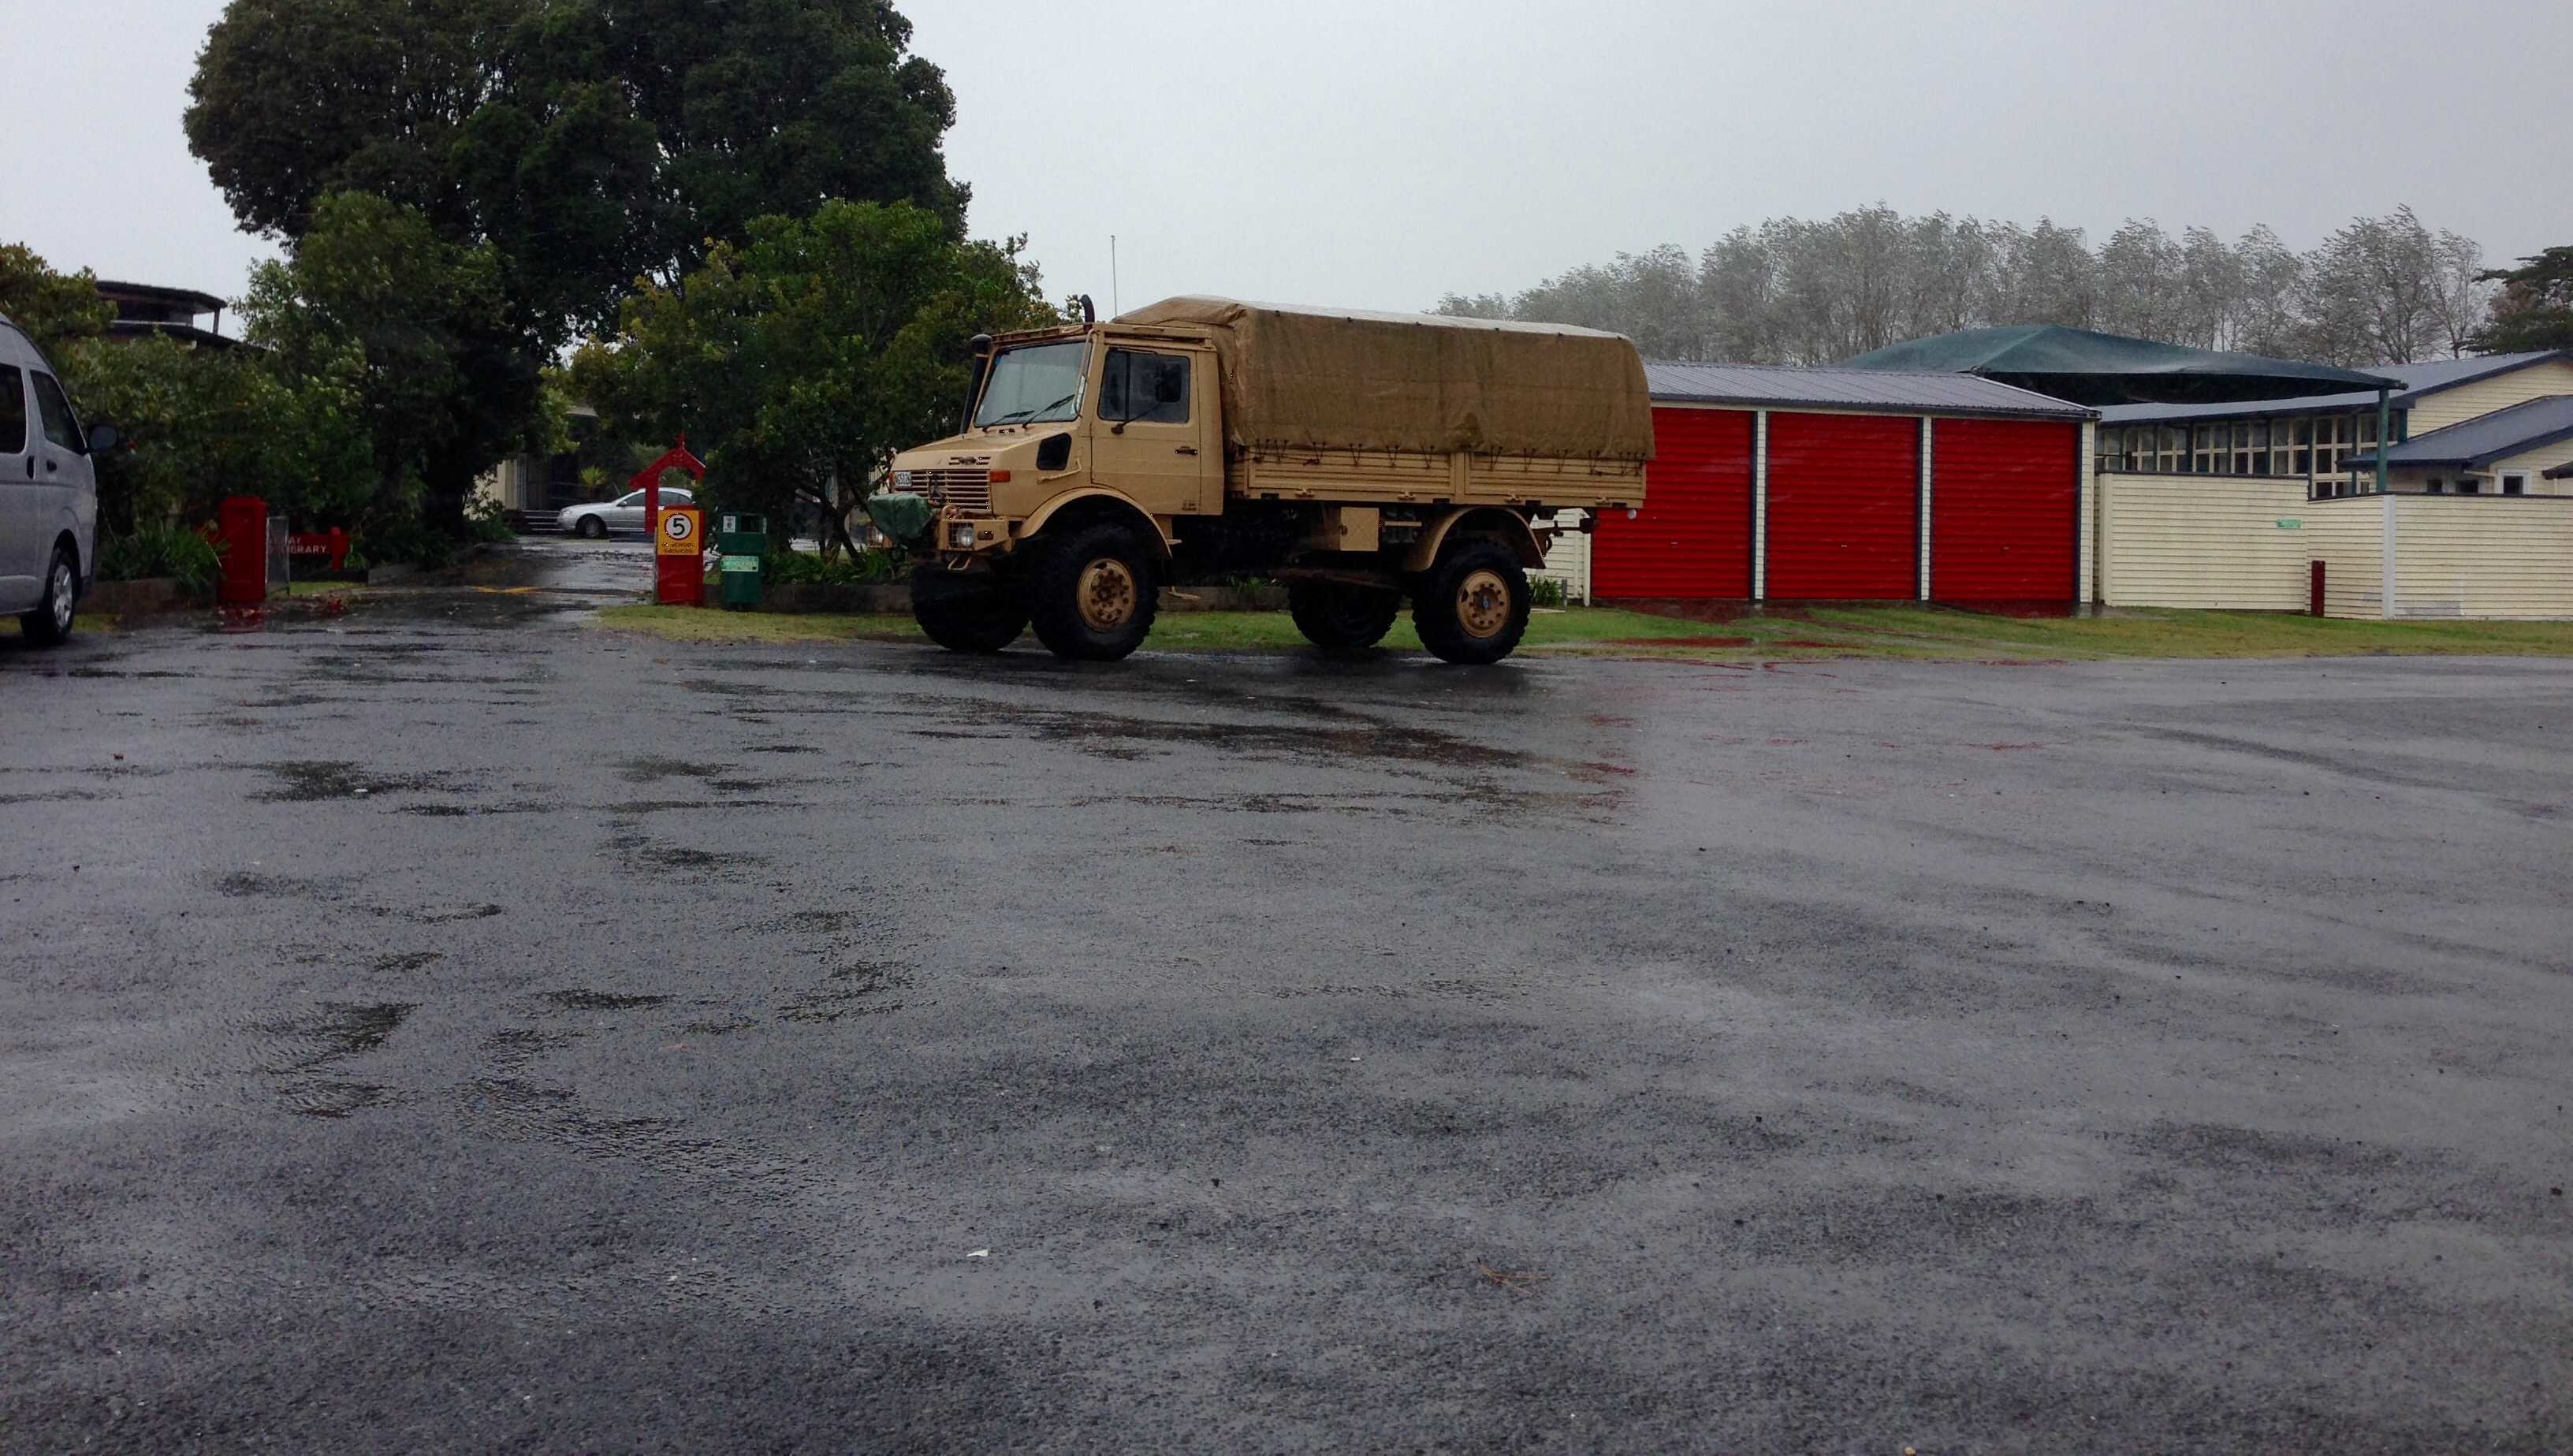 Army has arrived outside the Tolaga Bay Primary School.